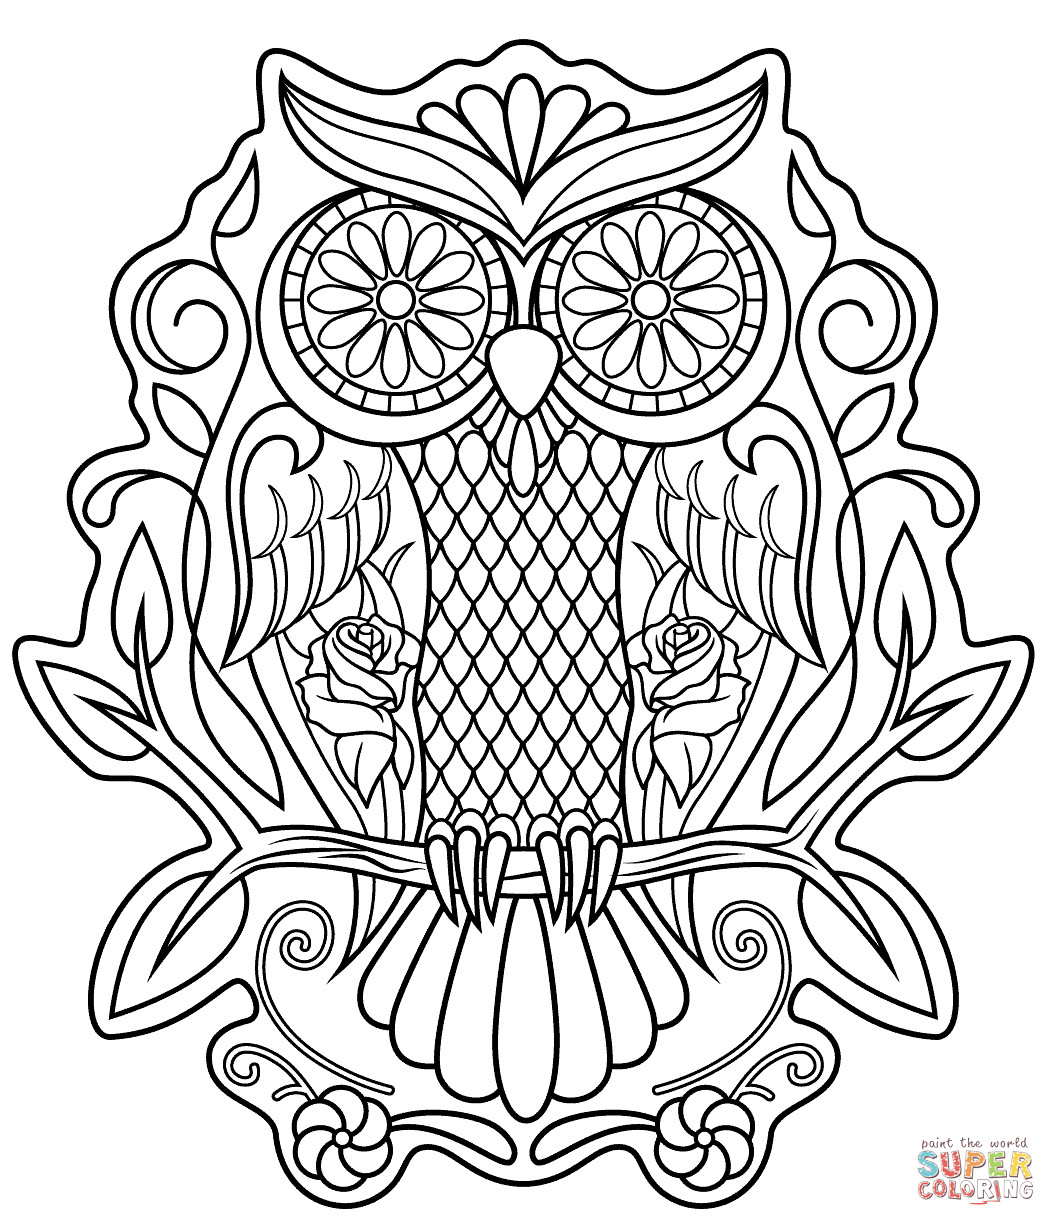 Coloring Pages For Teens Sculls
 Skull Coloring Pages For Teenagers Coloring Pages